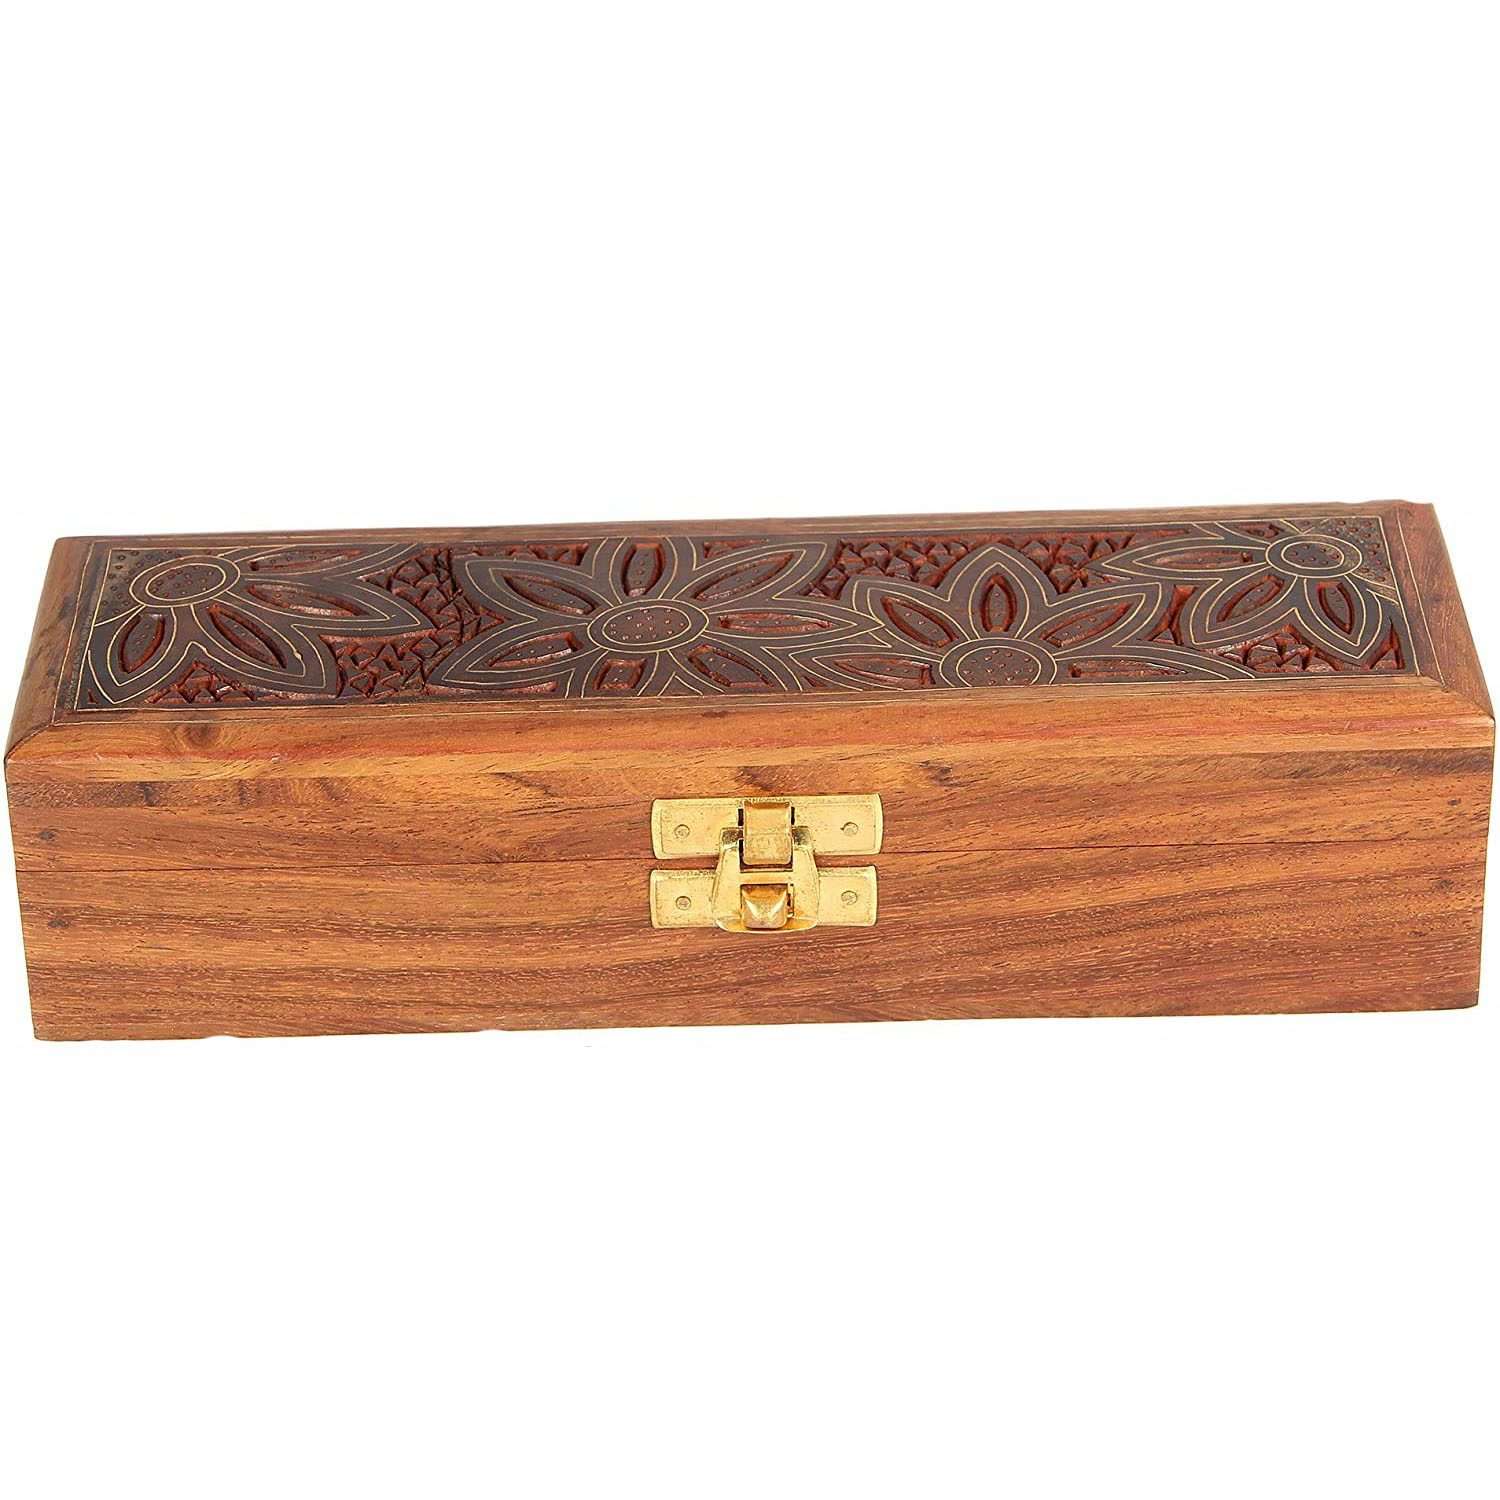 Handmade Wooden Jewellery Box | Pencil Box for Jewel Organizer | Hand Carved Carvings | Gift Items